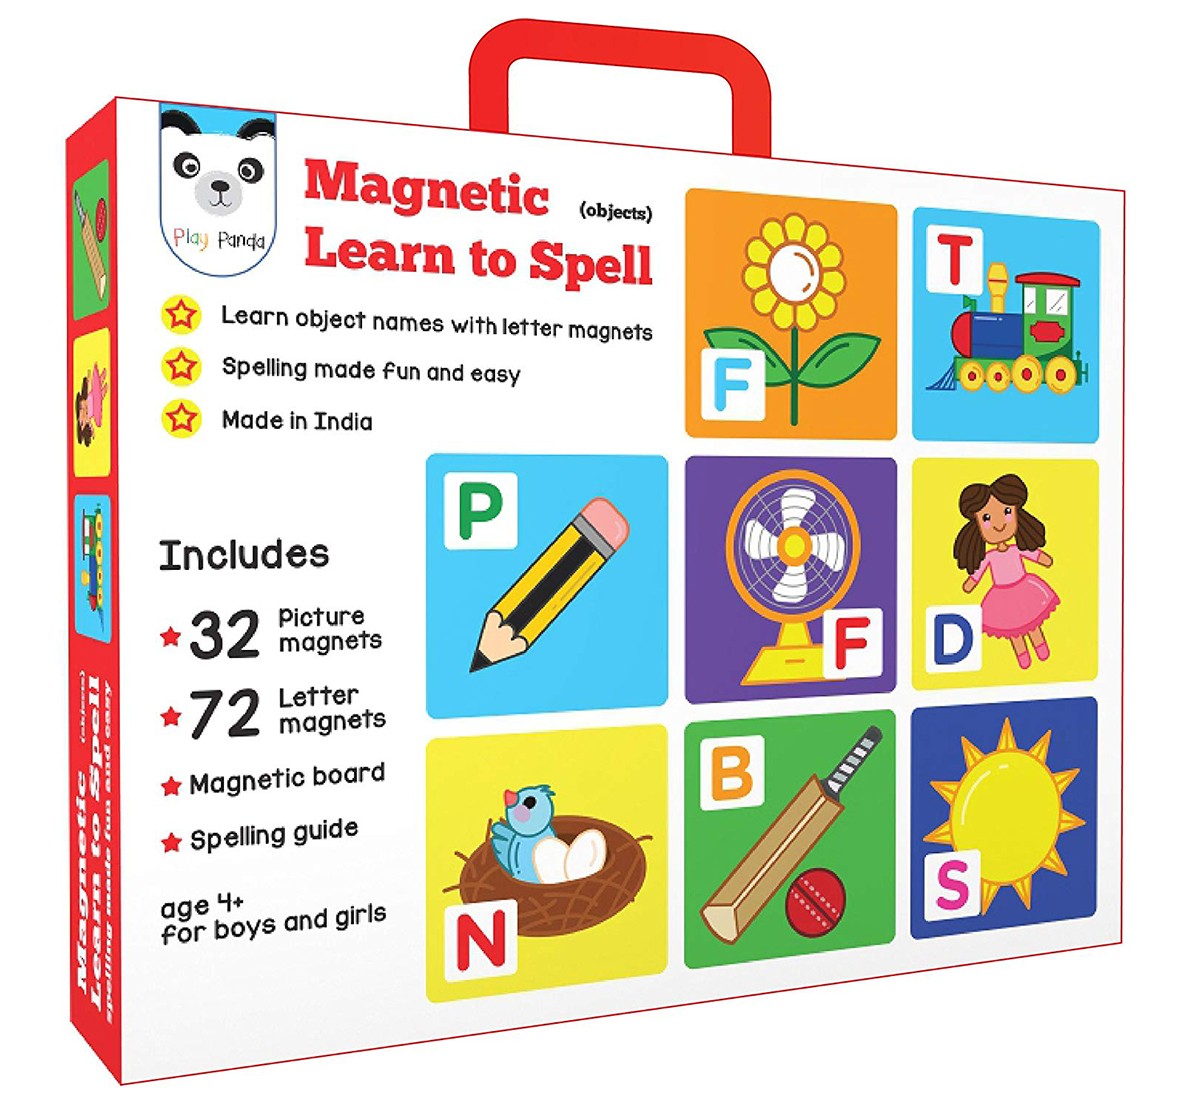 Play Panda Magnetic Learn To Spell Objects With 32 Picture Magnets, 72 Letter Magnets, Magnetic Board And Spelling Guide,  4Y+ (Multicolor)